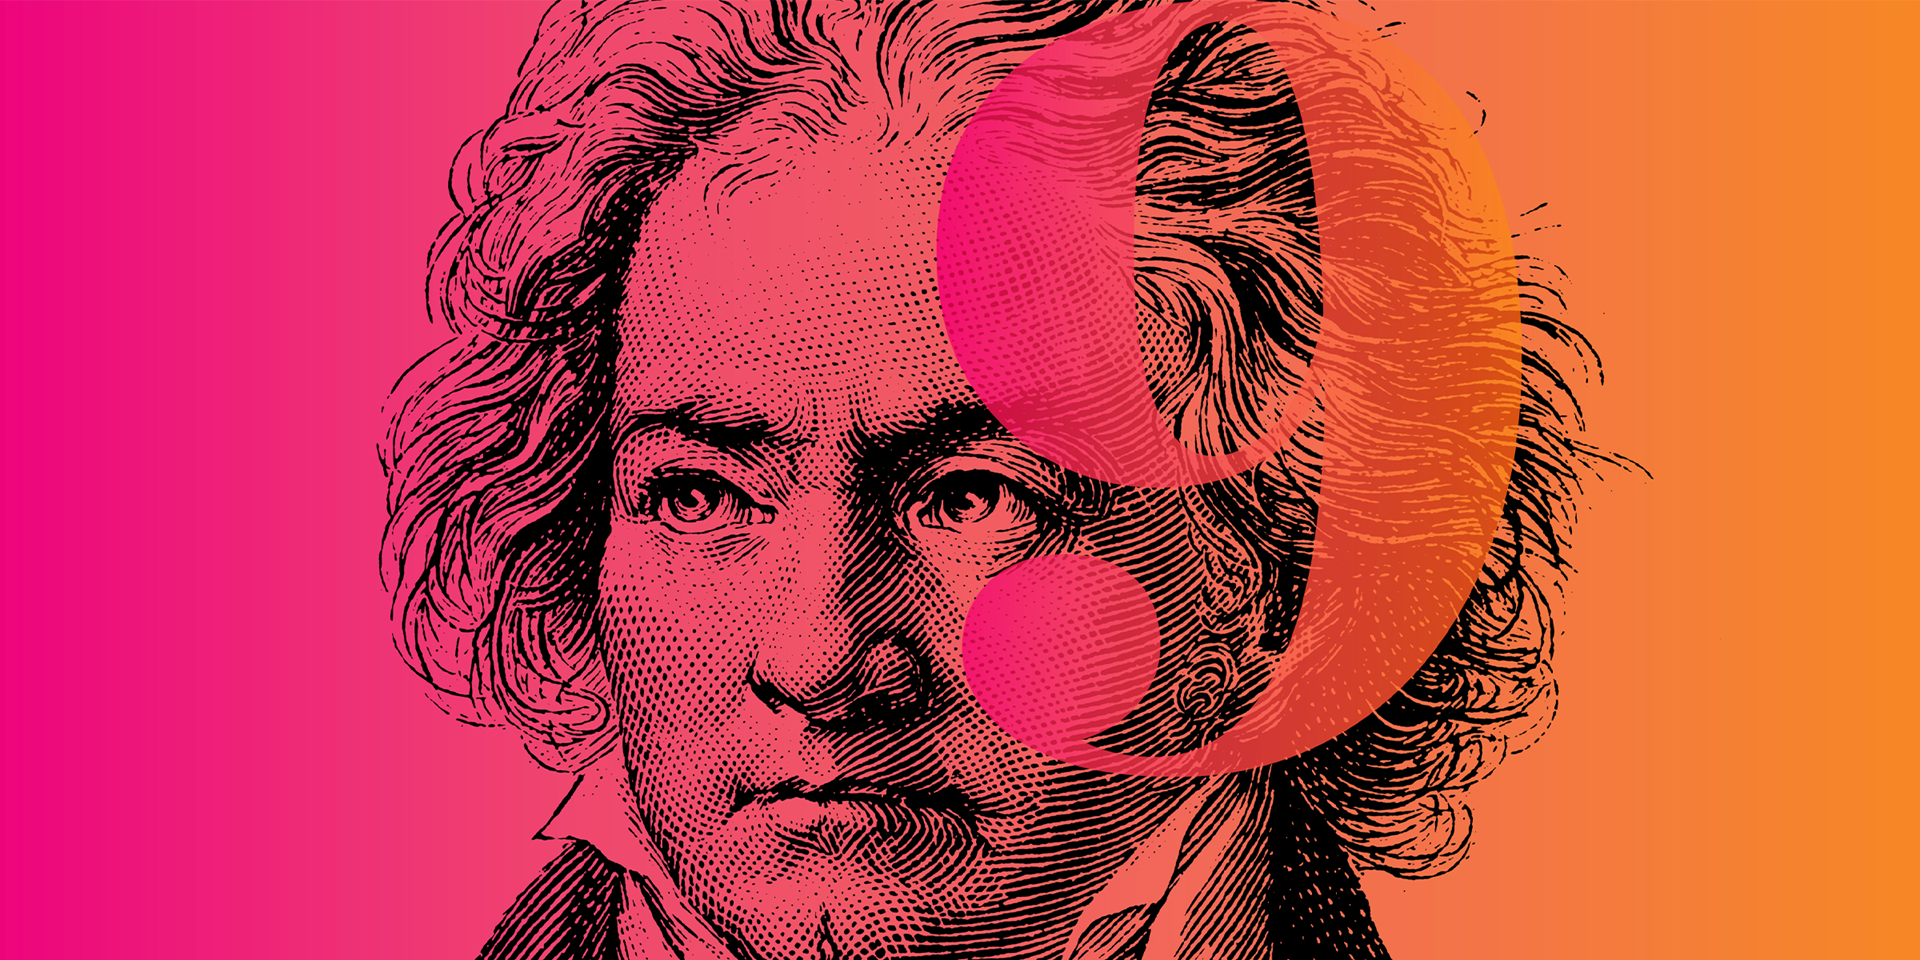 a stylized illustration of the composer Ludwig van Beethoven against a two-tone background, split diagonally between pink and orange. Beethoven&#39;s portrait is in a line-drawing style, prominently showcasing his intense gaze and classic period hairstyle. Overlaying the illustration is the number is a semi-transparent number 9.